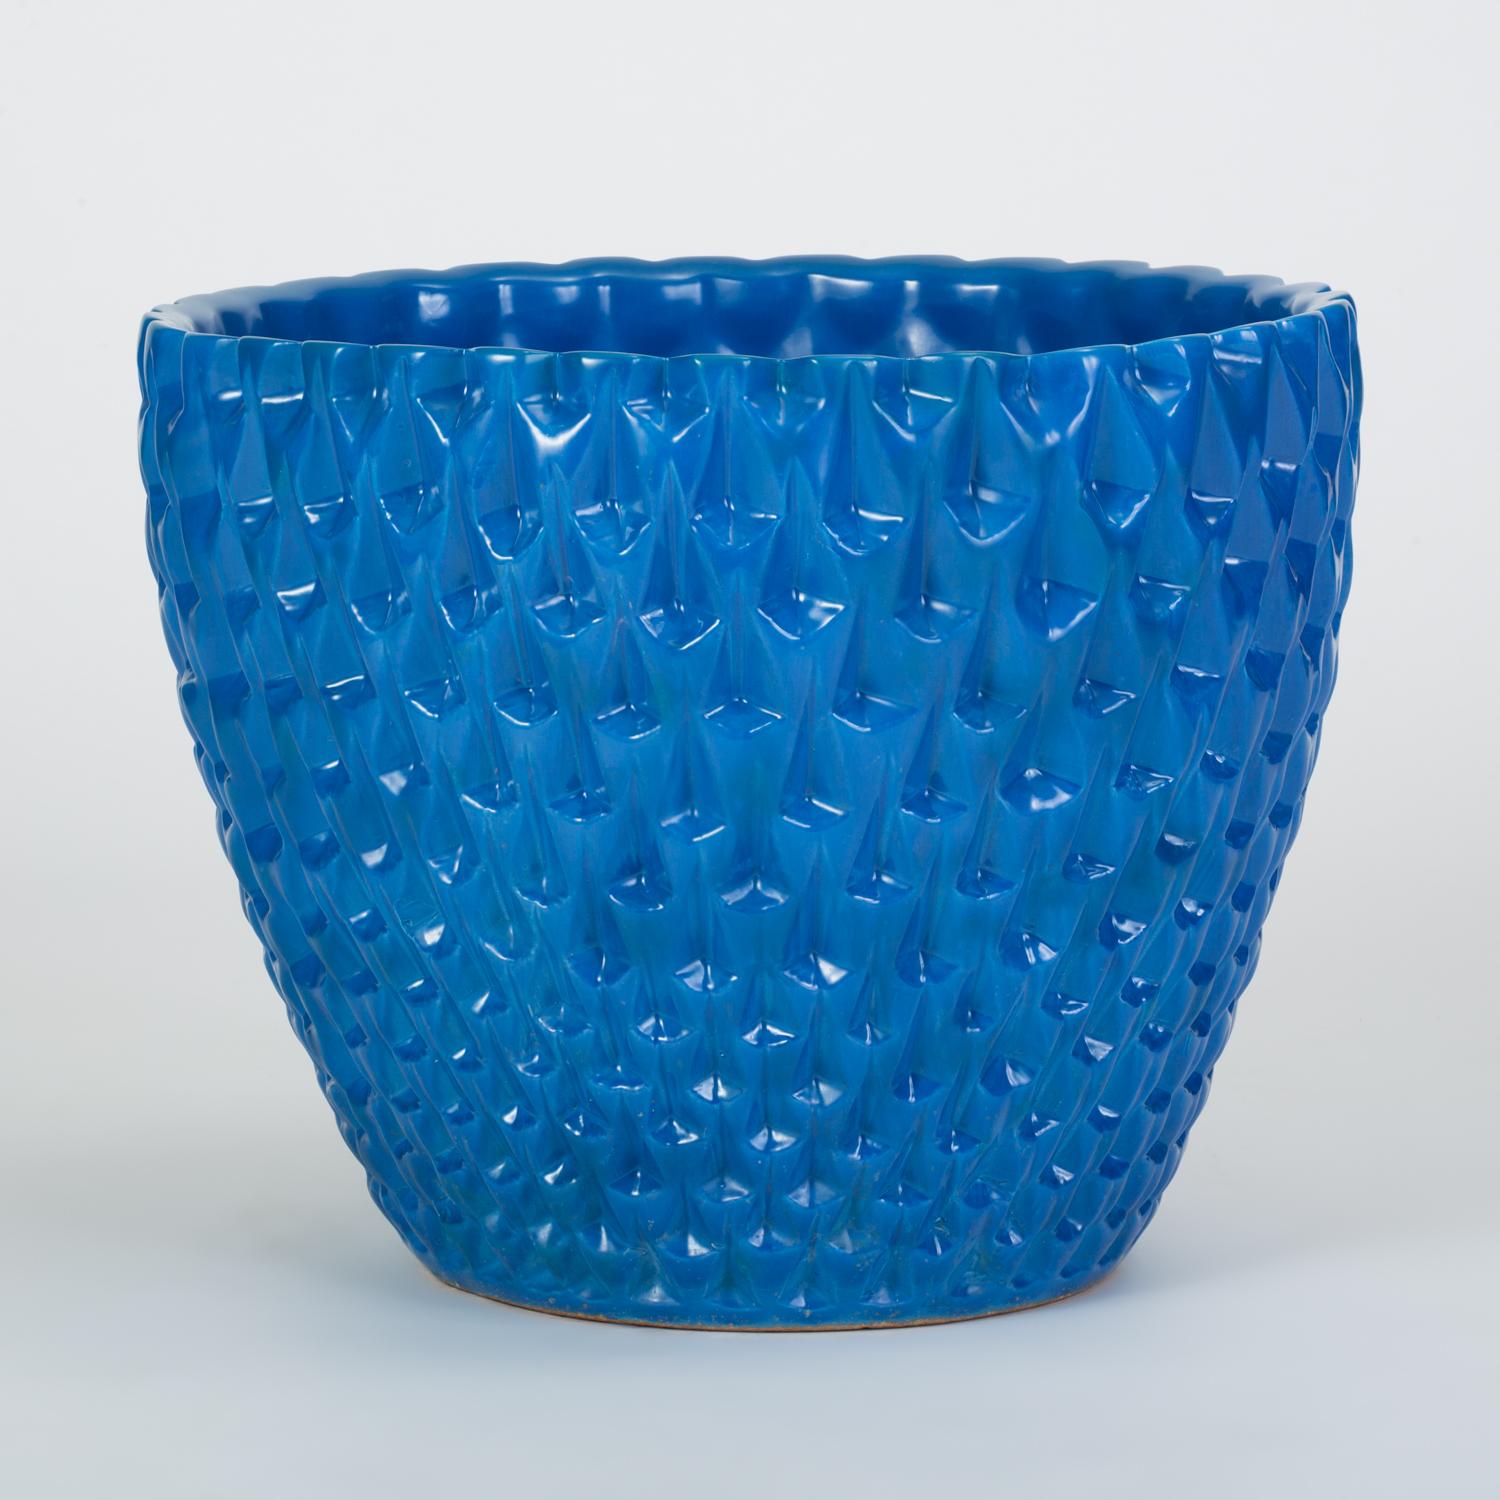 Mid-Century Modern Phoenix-1 Planter in Blue Glaze by David Cressey for Architectural Pottery